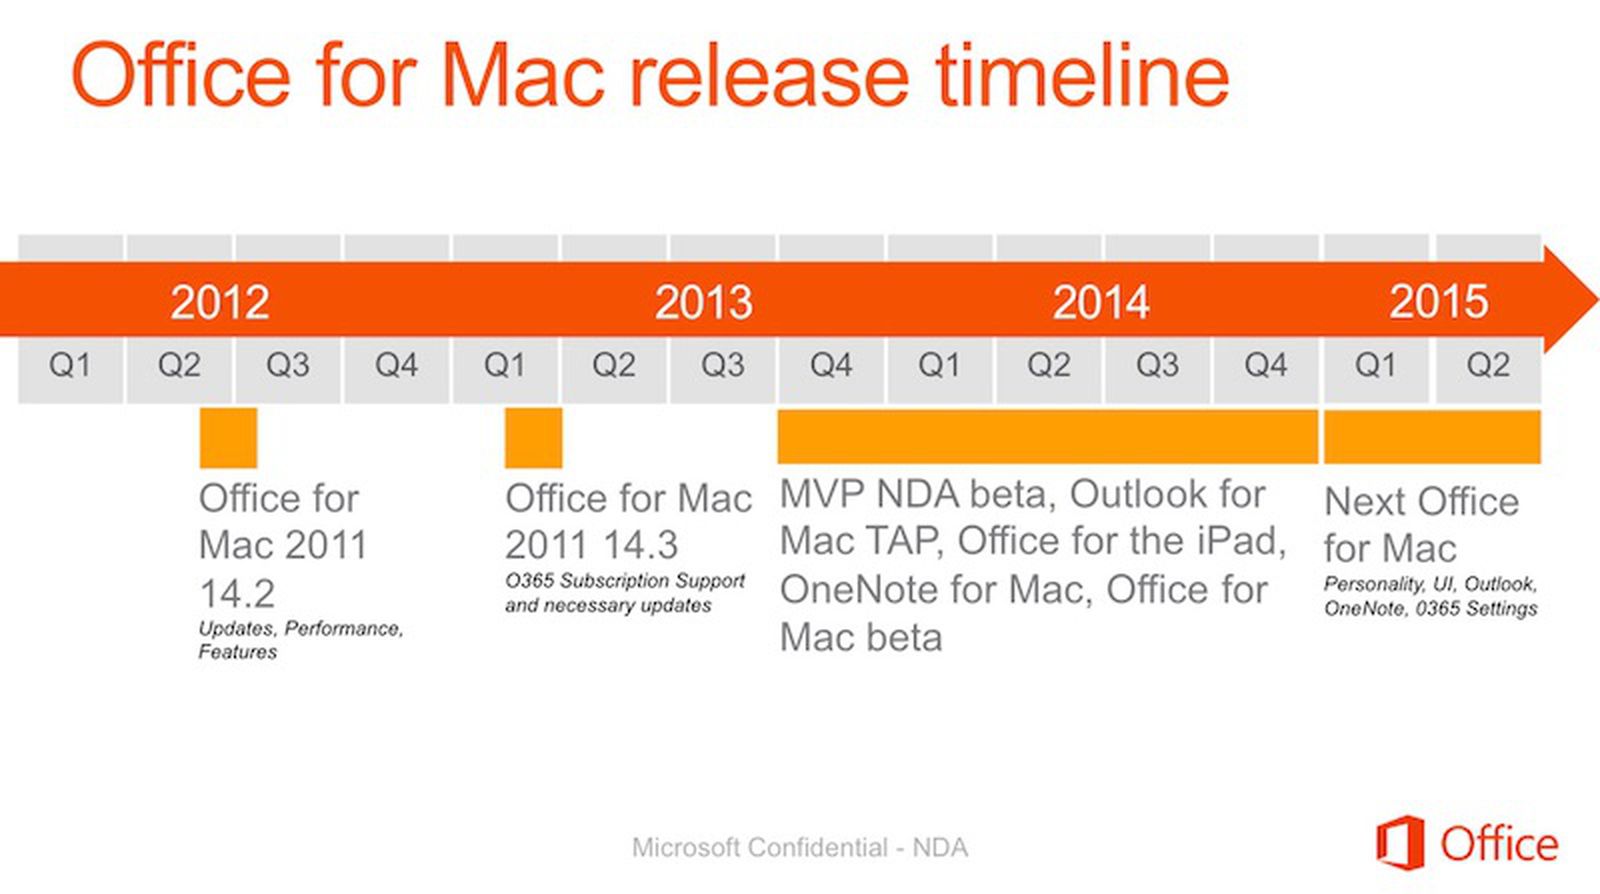 upgrade office for mac 2011 to 2013